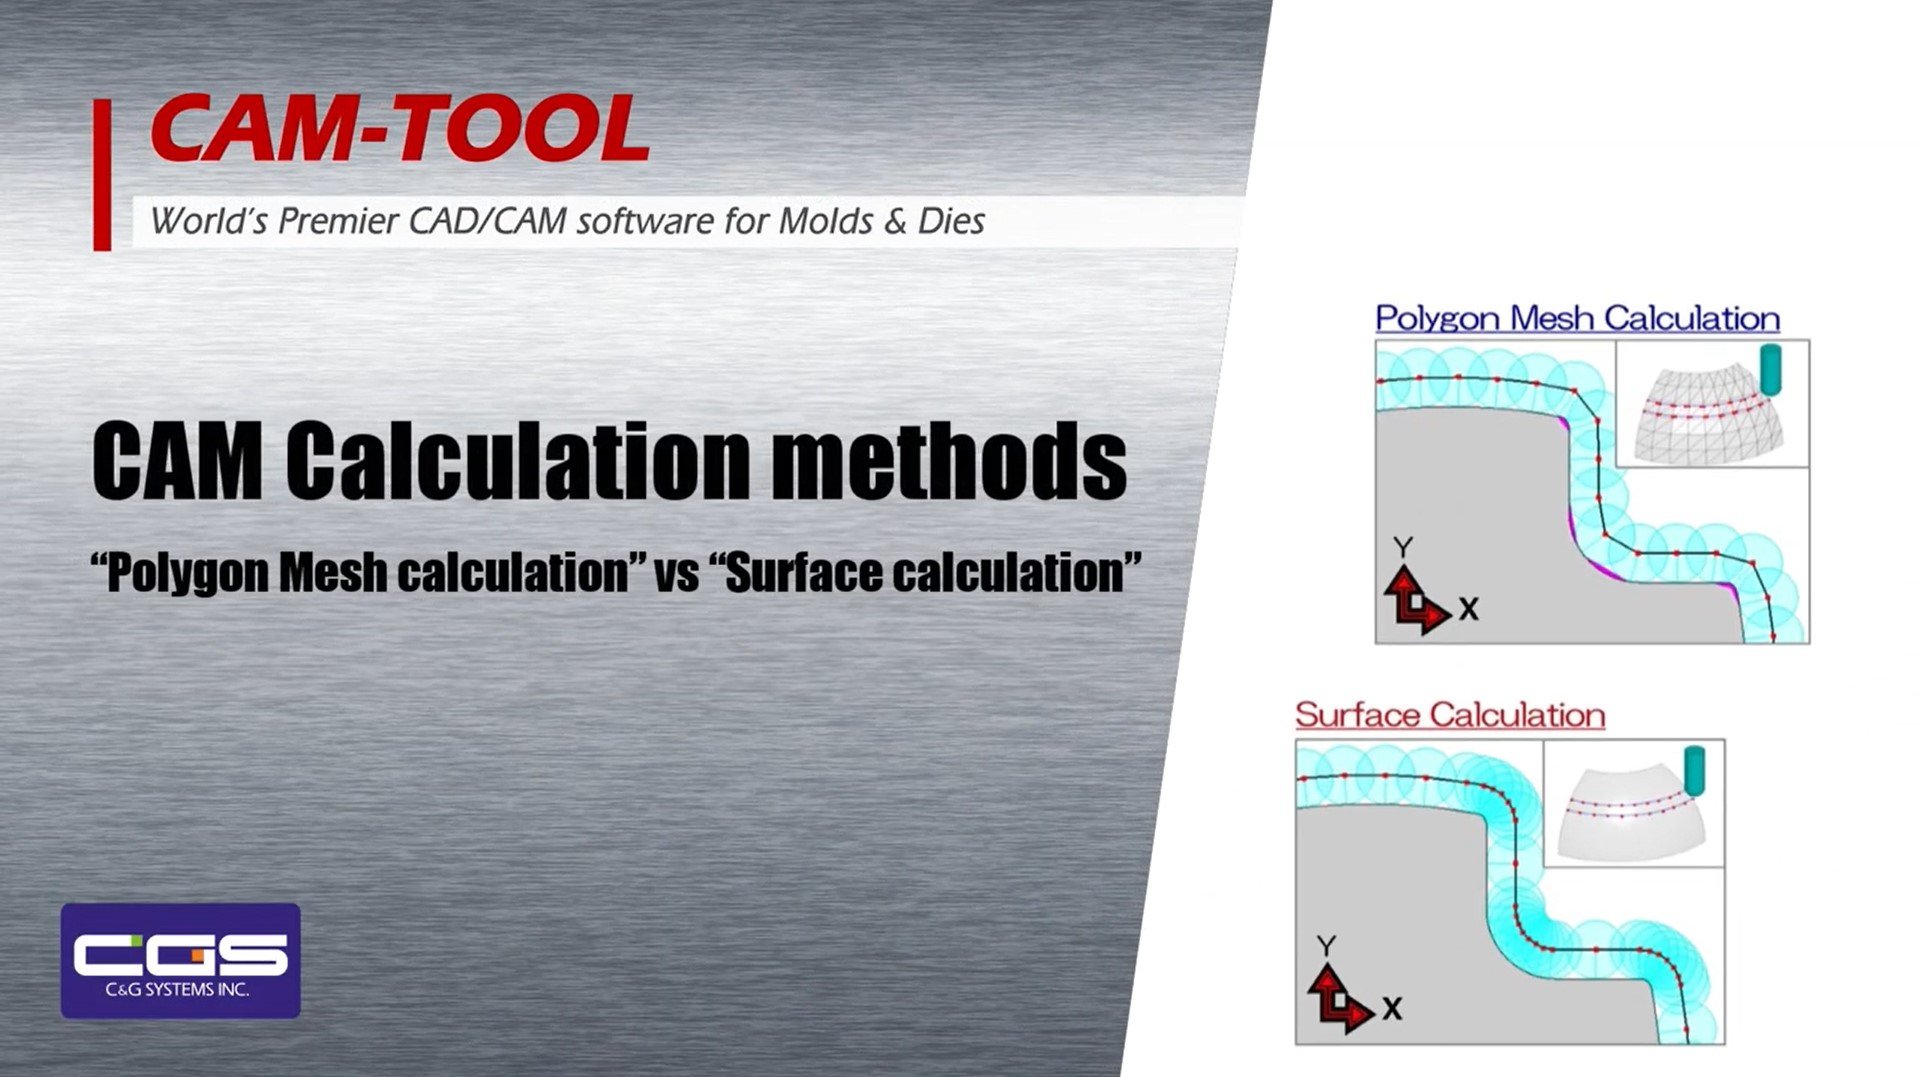 What is the difference between “Polygon calculation” and “Surface calculation”